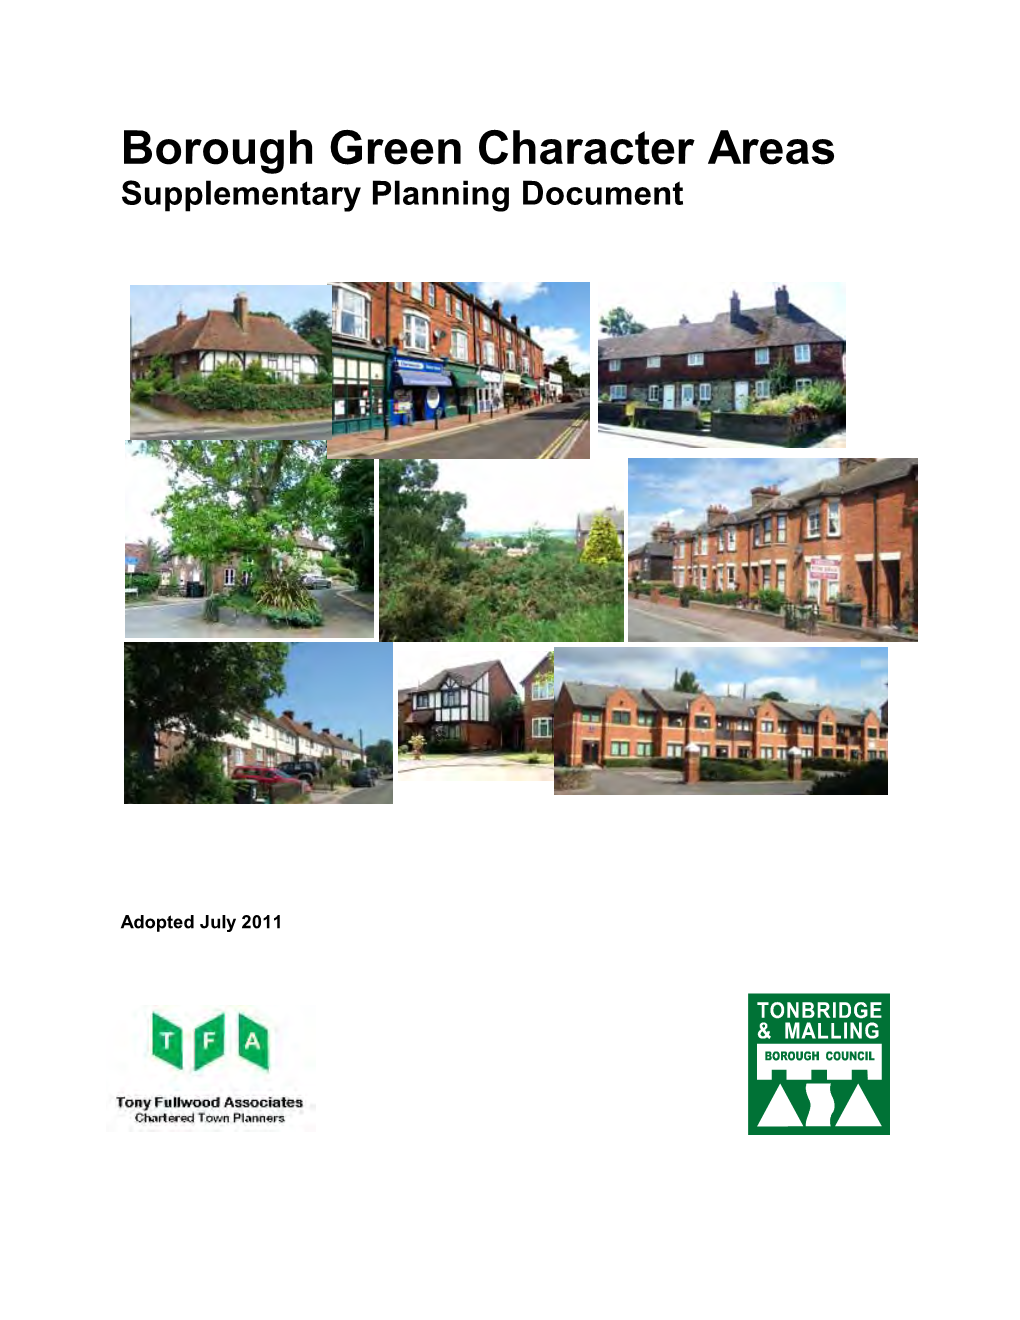 Borough Green Character Areas Supplementary Planning Document